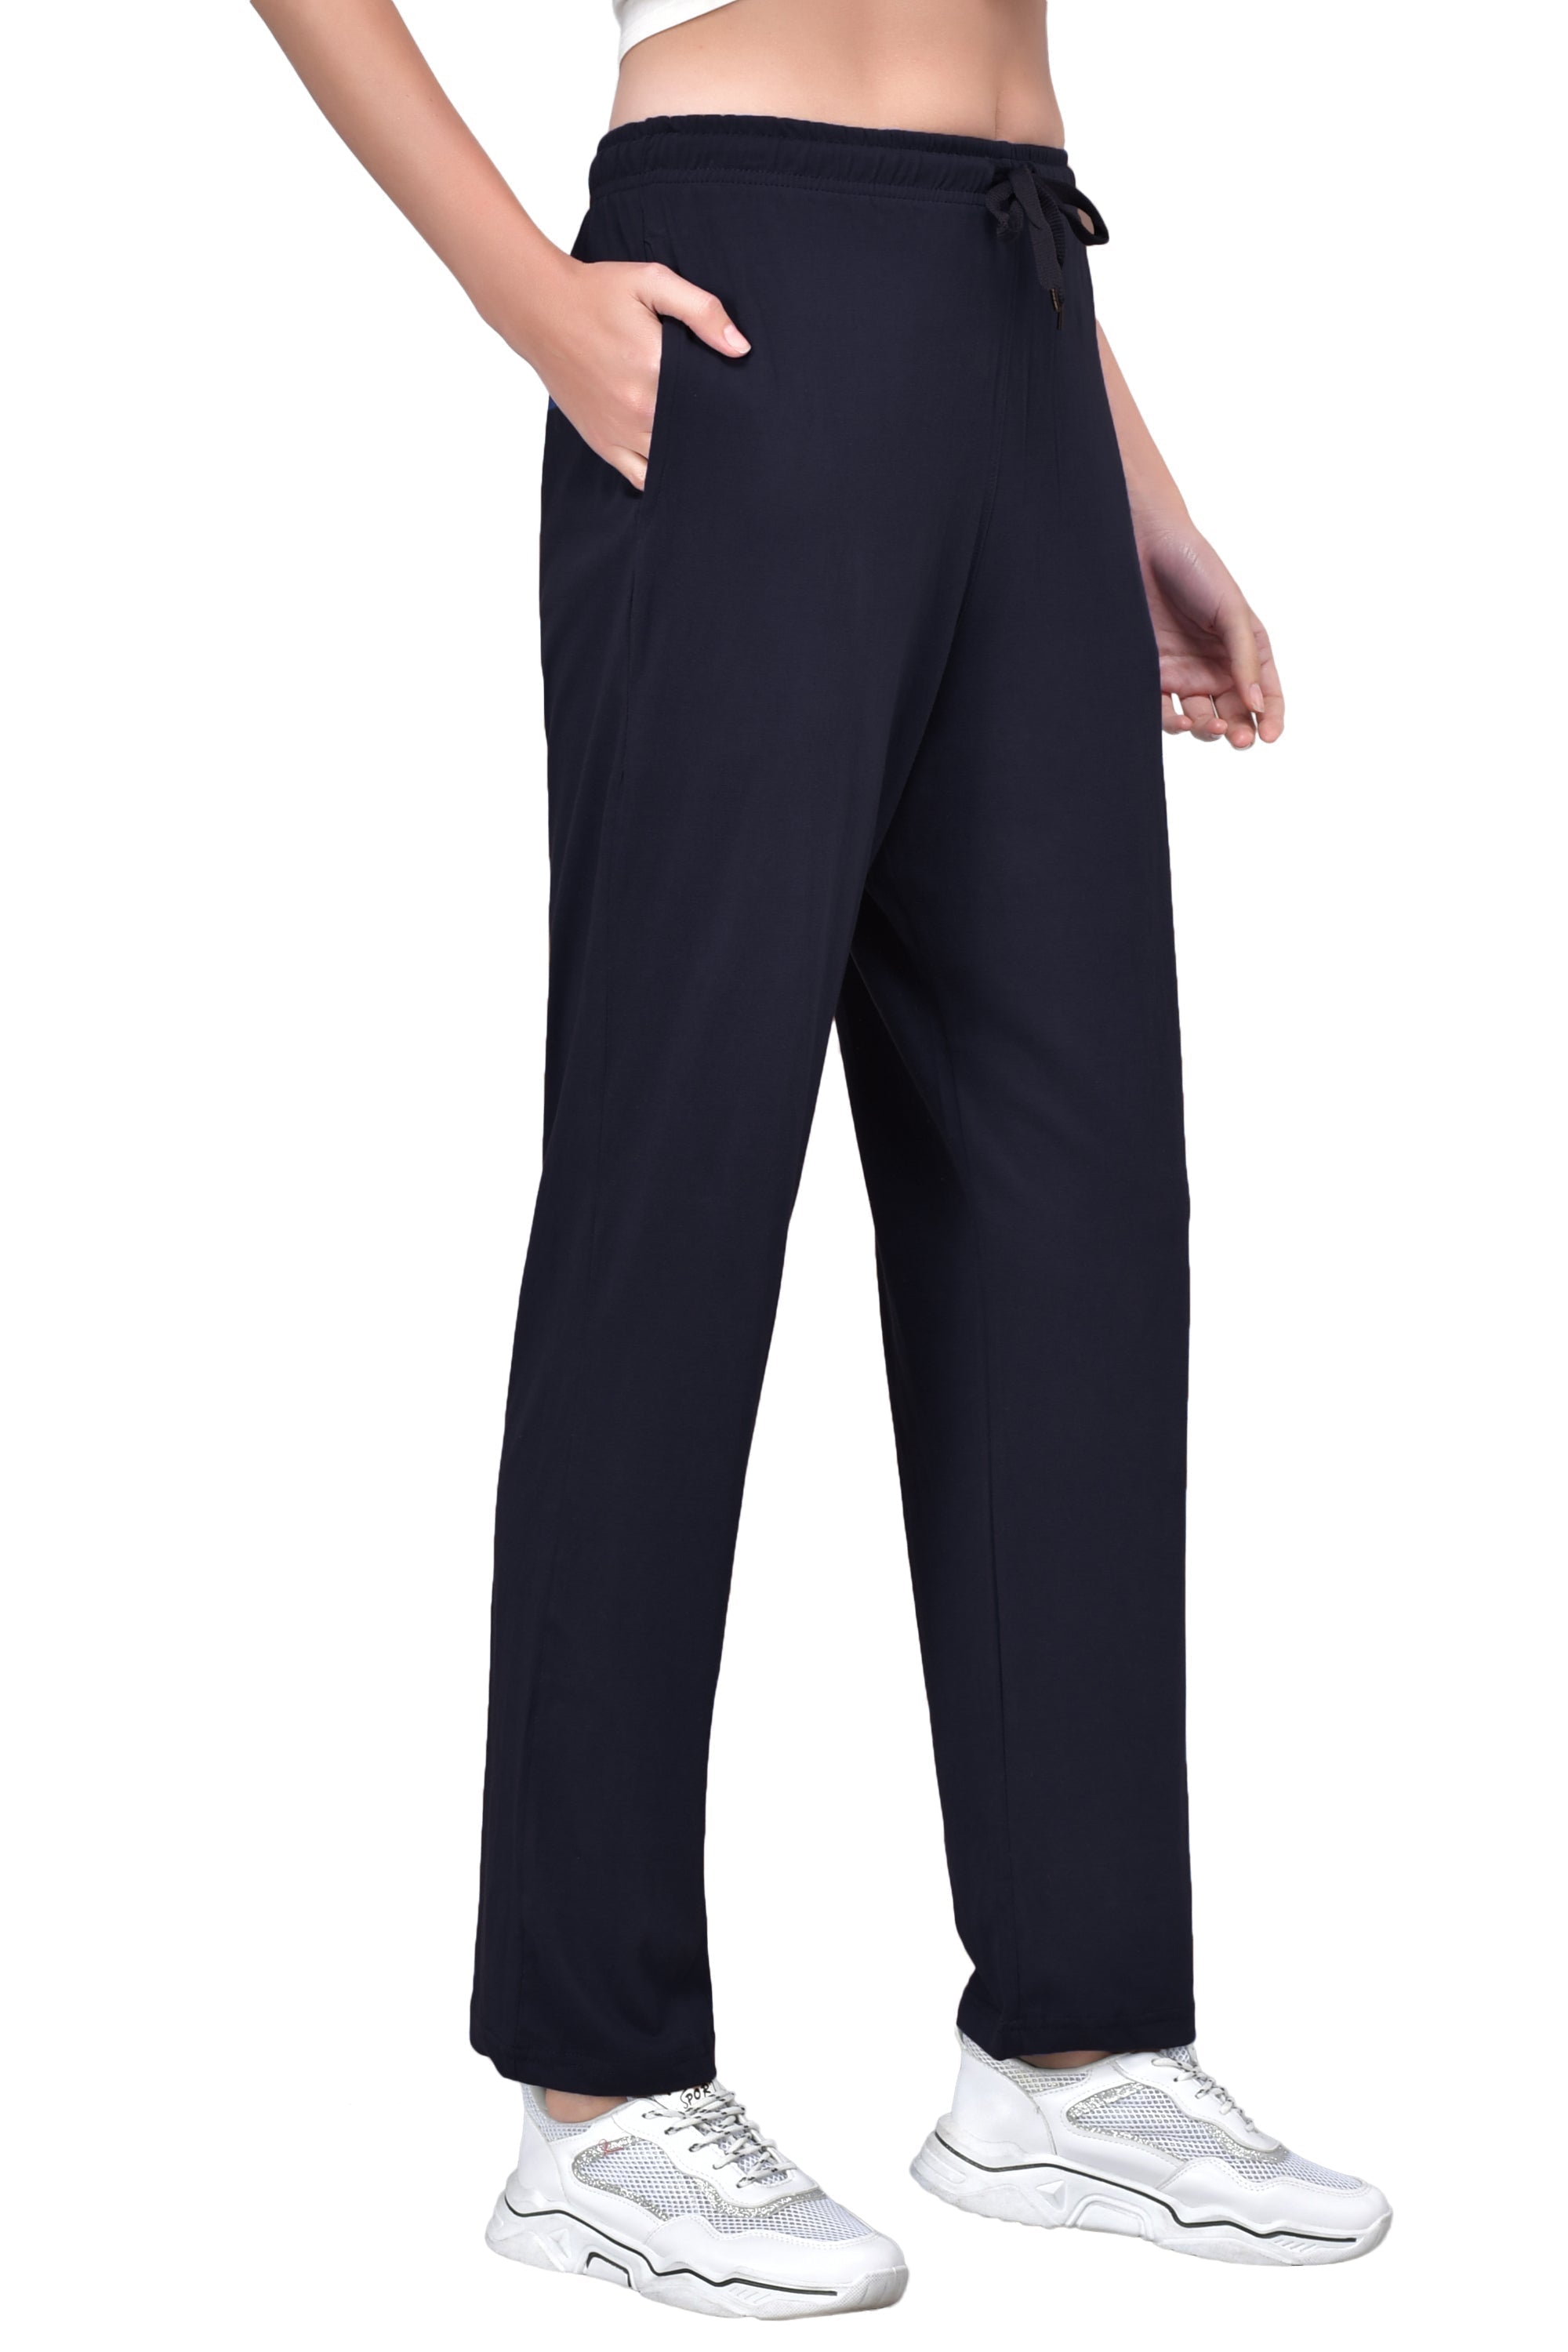 Jeans & Trousers | Go Colors Women Solid Blue Track Pants | Freeup